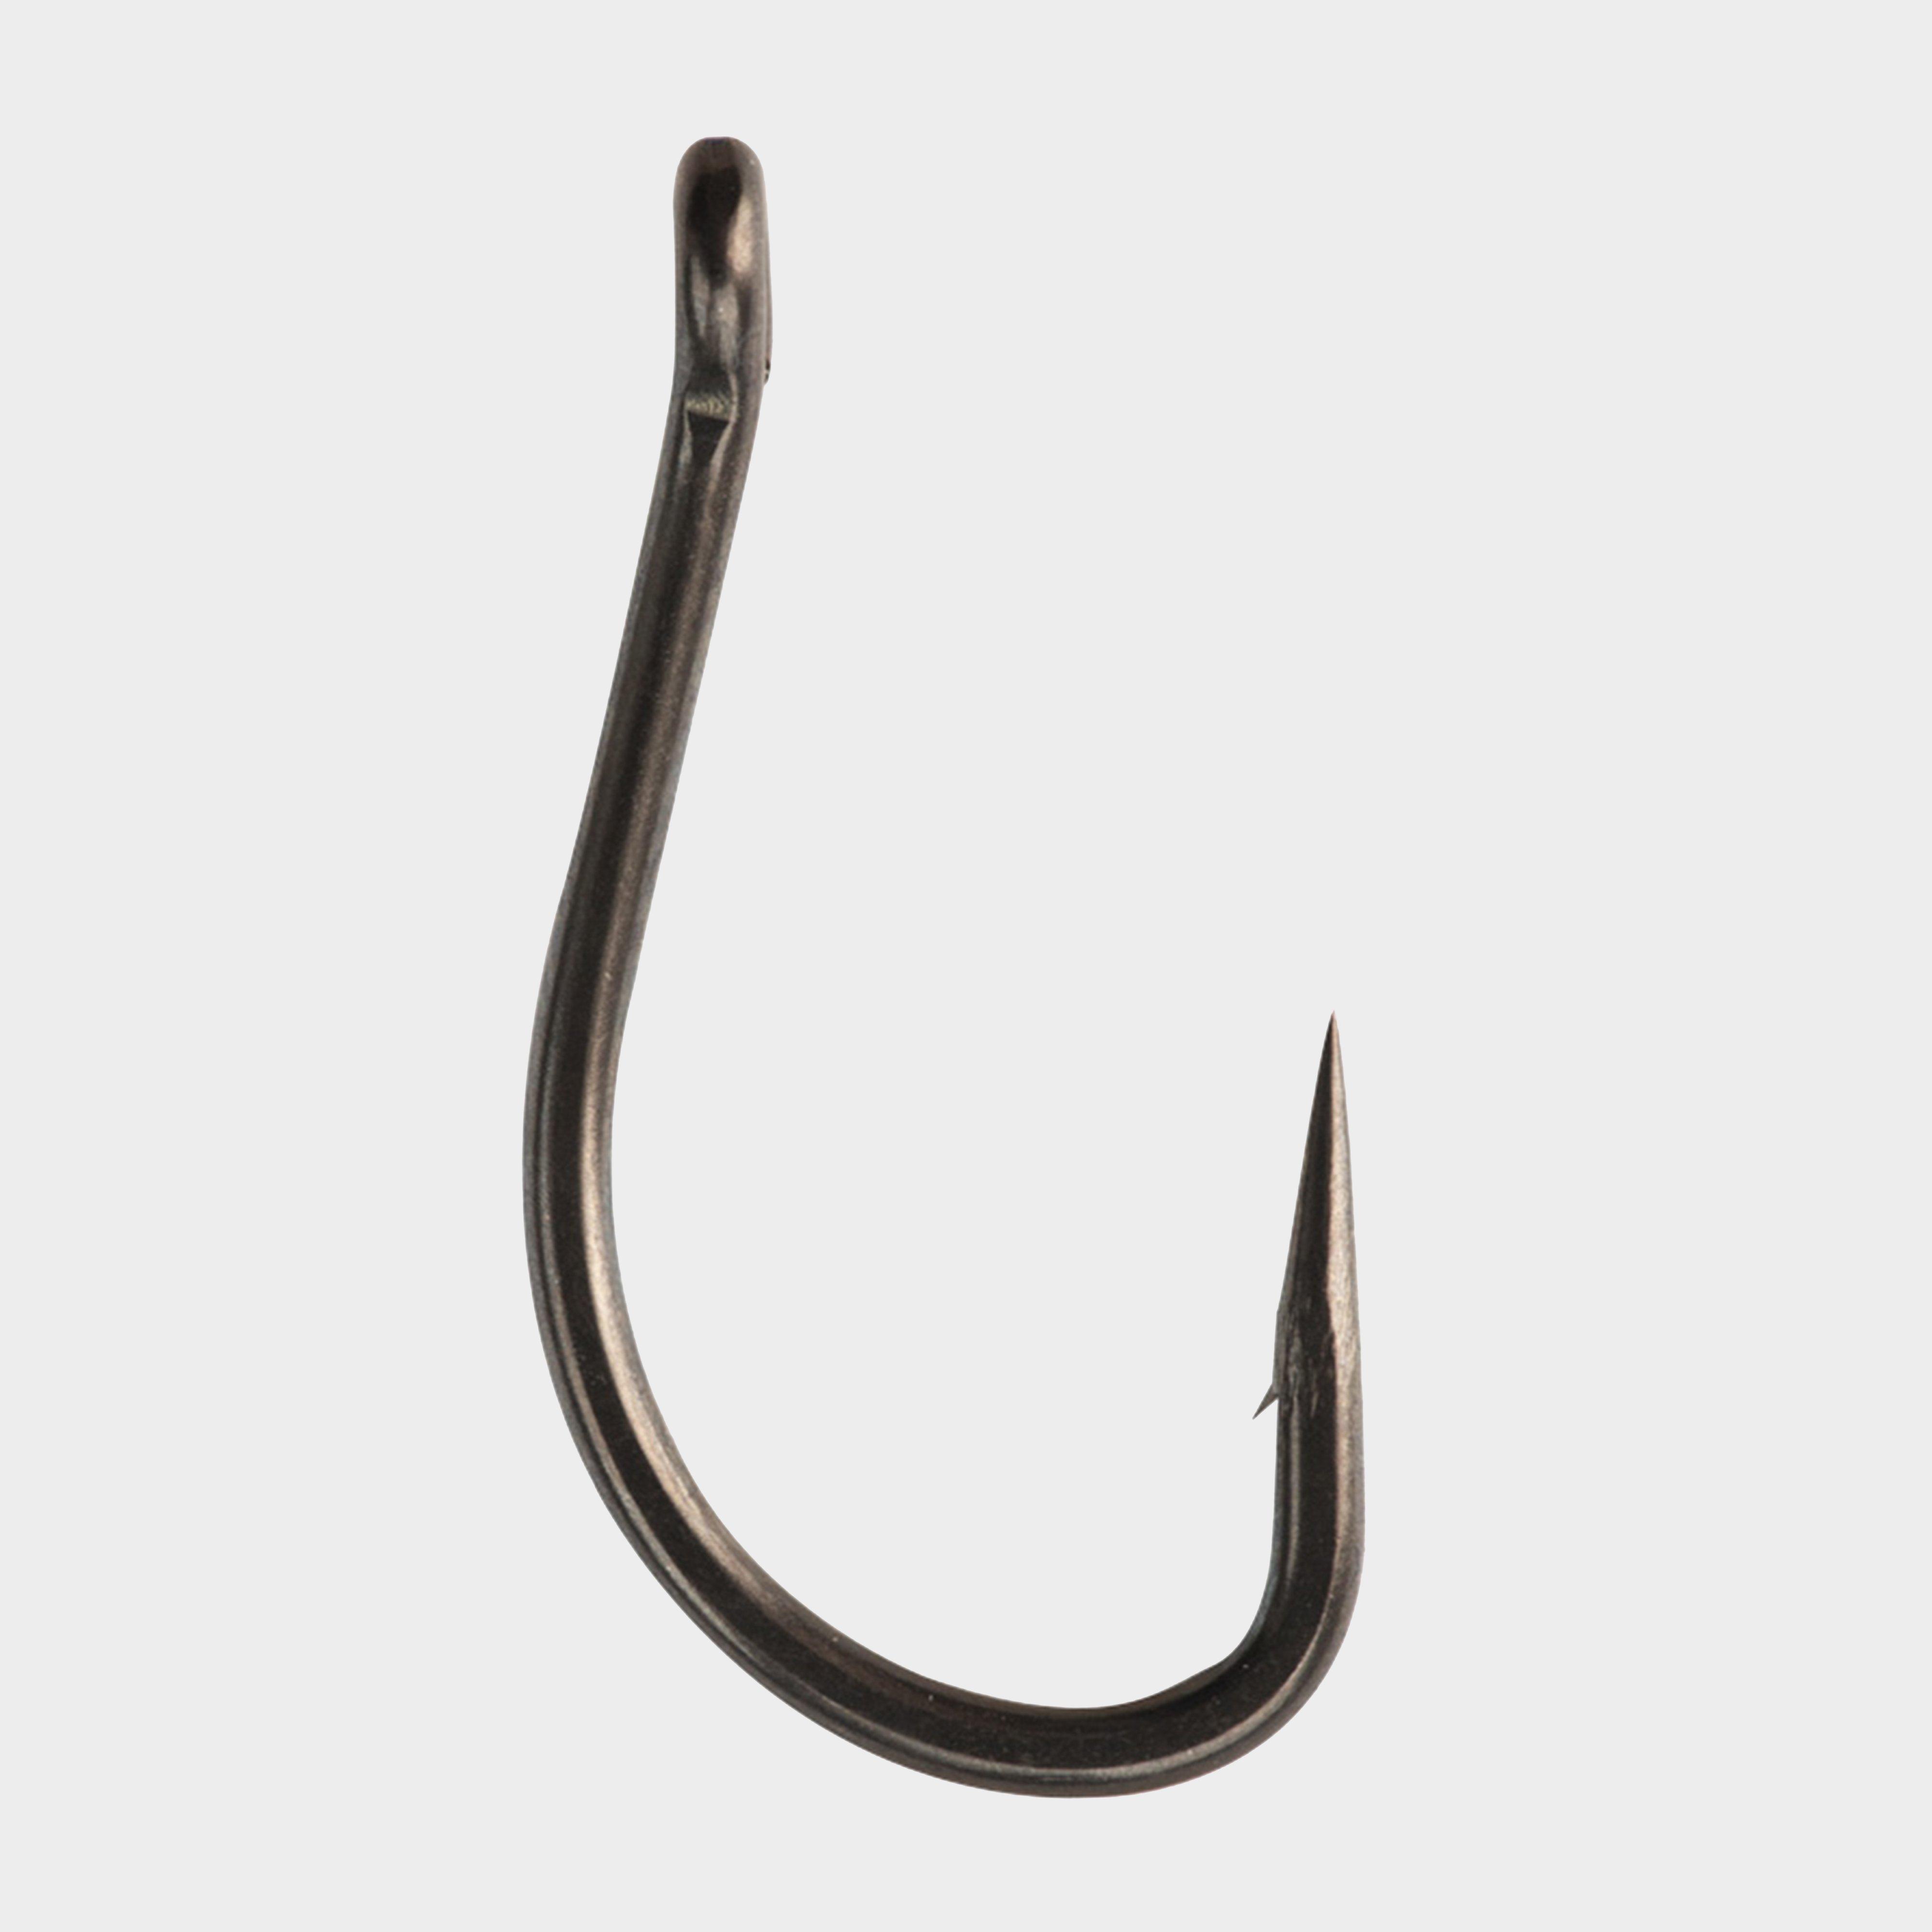 Photos - Fishing Hook / Jig Head Angler THINKING  Out-Turned Eye Hook Size 6  (Barbless)